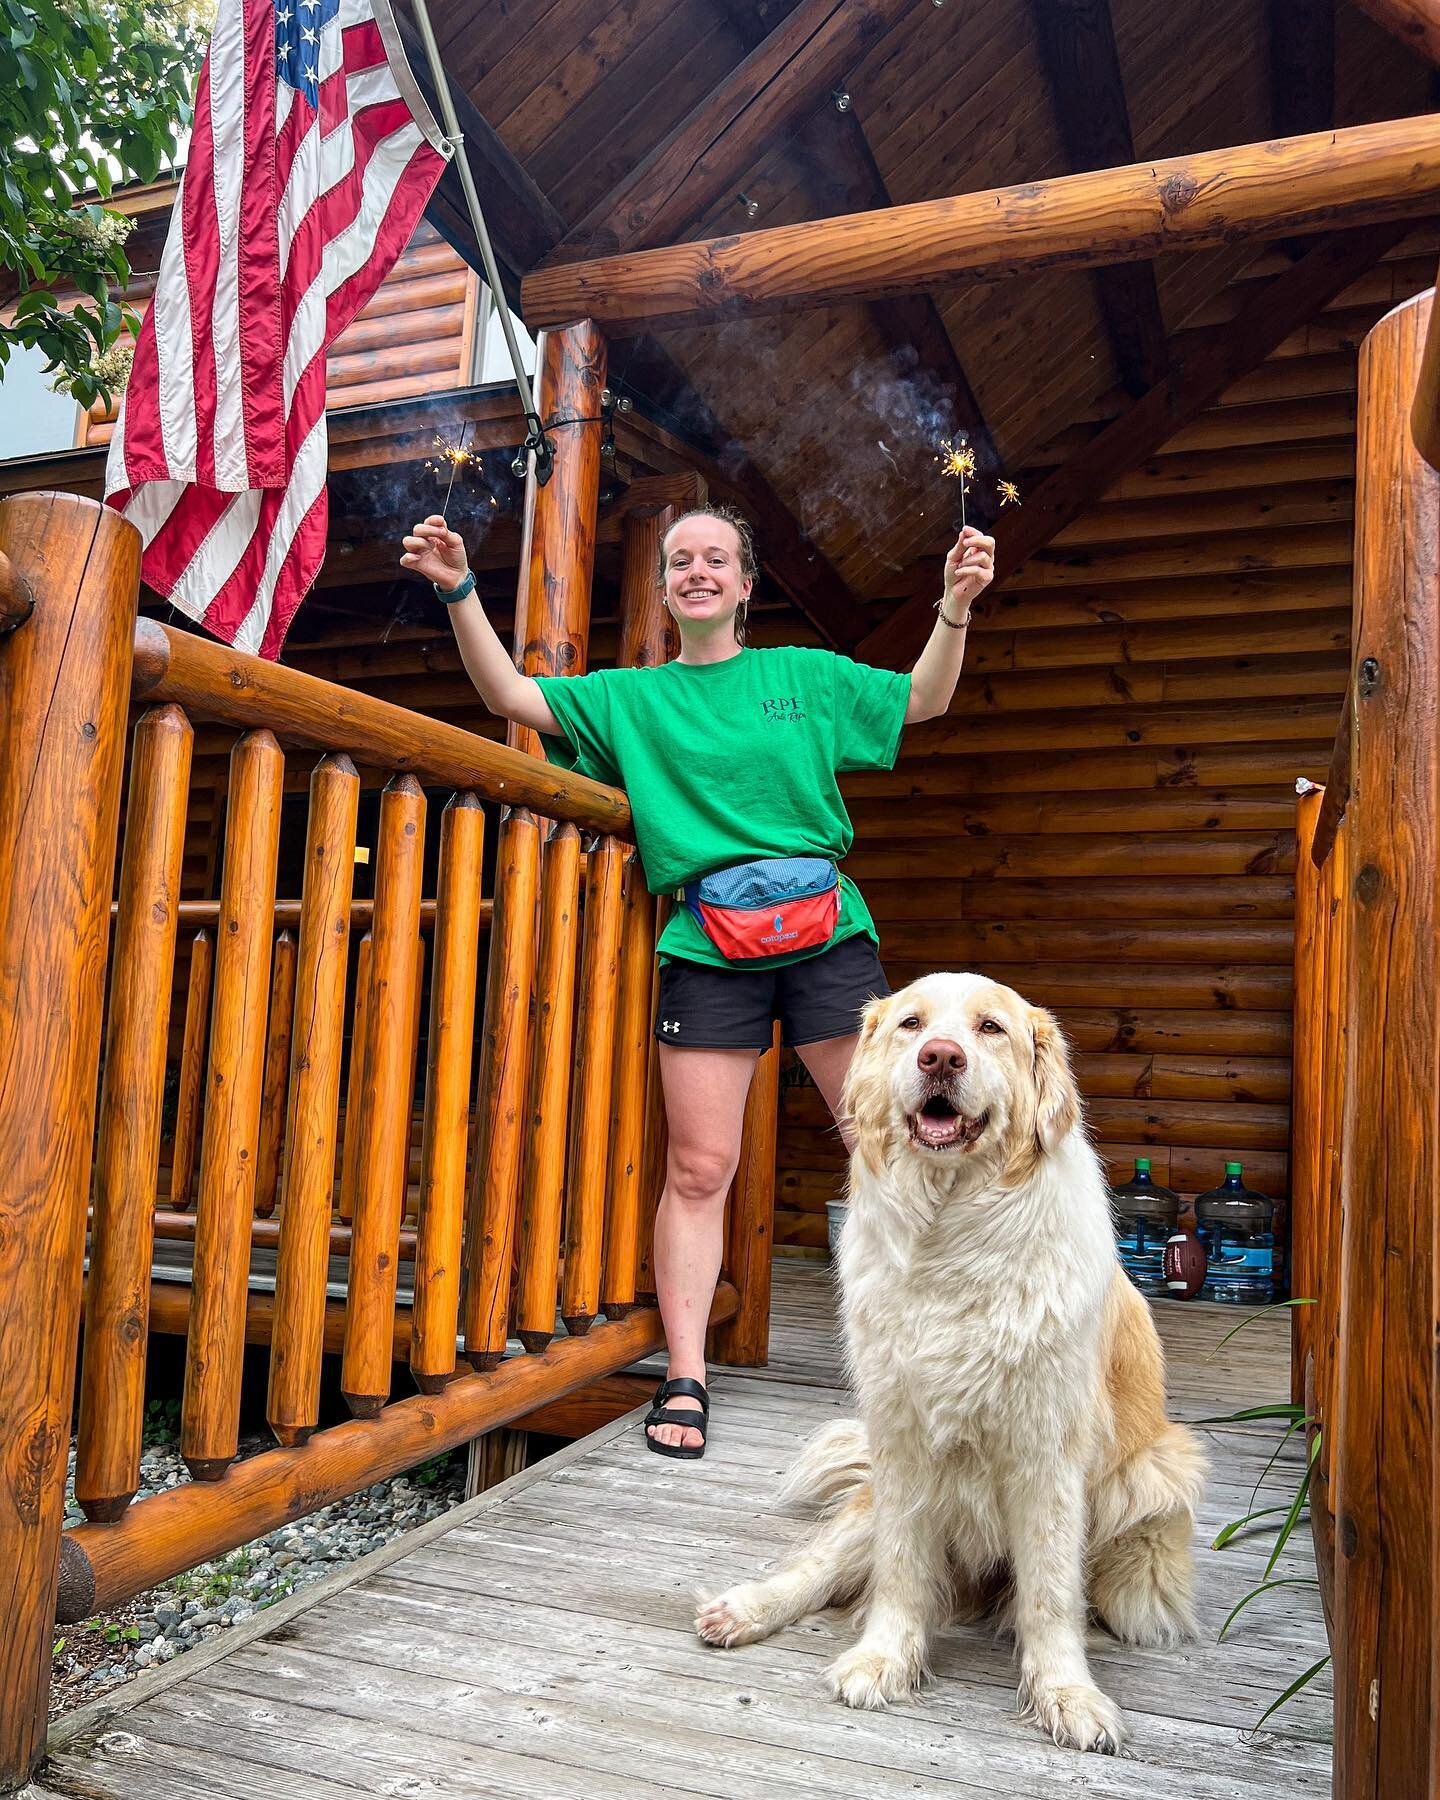 Happy Birthday America &amp; an even Happier Birthday to our resident mascot, Zoe! We are beyond excited to spend time outside after a month of rain and turn on the grill for some good ole&rsquo; burgers and hotdogs! Cheers to celebrating another yea